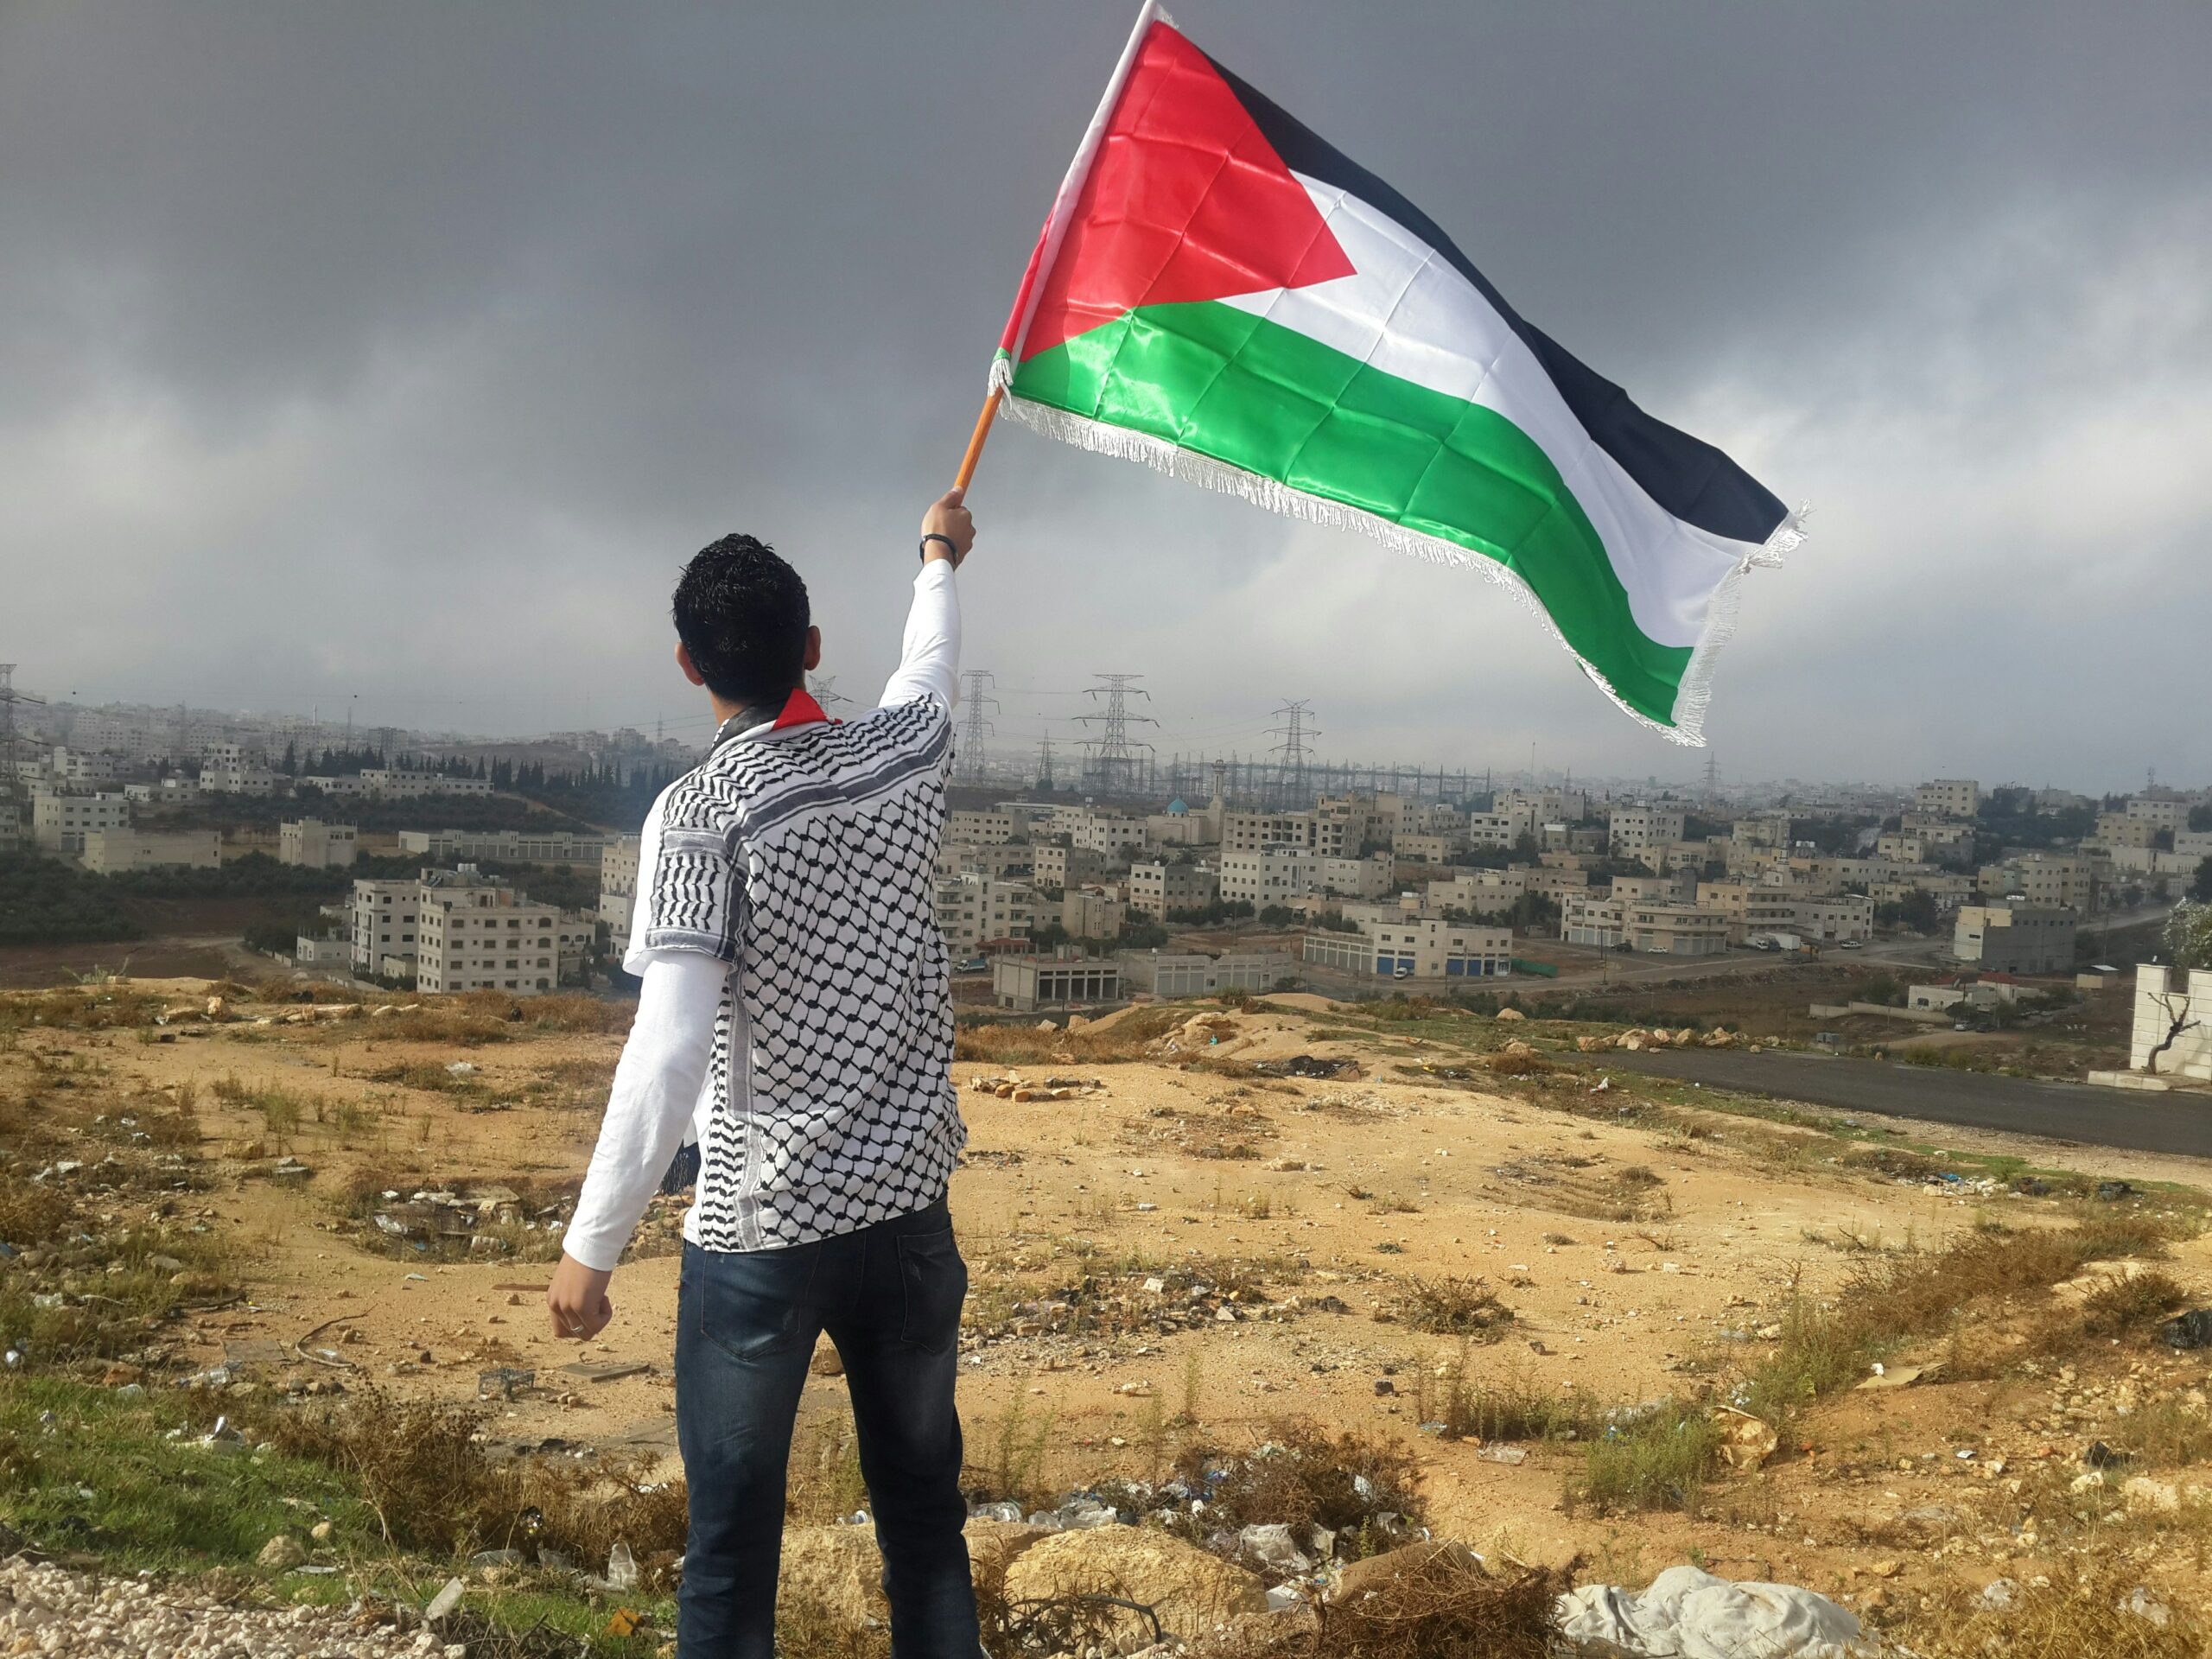 A person waving a Palestine flag with the olive branch pattern of the keffiyeh on their shirt, standing on a hill overlooking a residential neighborhood.